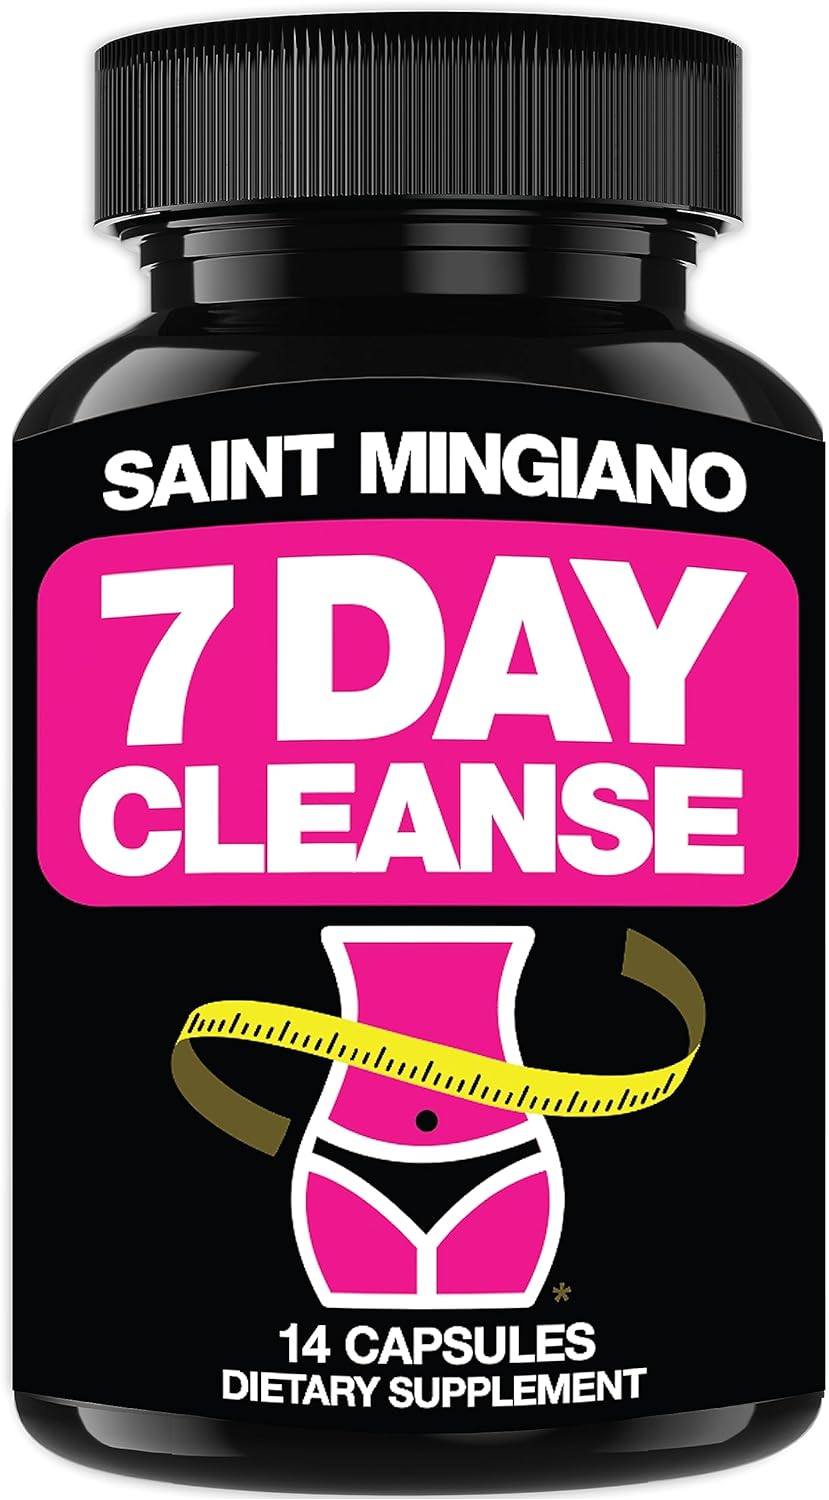 Saint Mingiano 7 Day Cleanse Program | Colon Detox With Natural Laxative For Constipation  Bloating | Extra-Strength Senna Leaf Supplements | Strong For Some People.